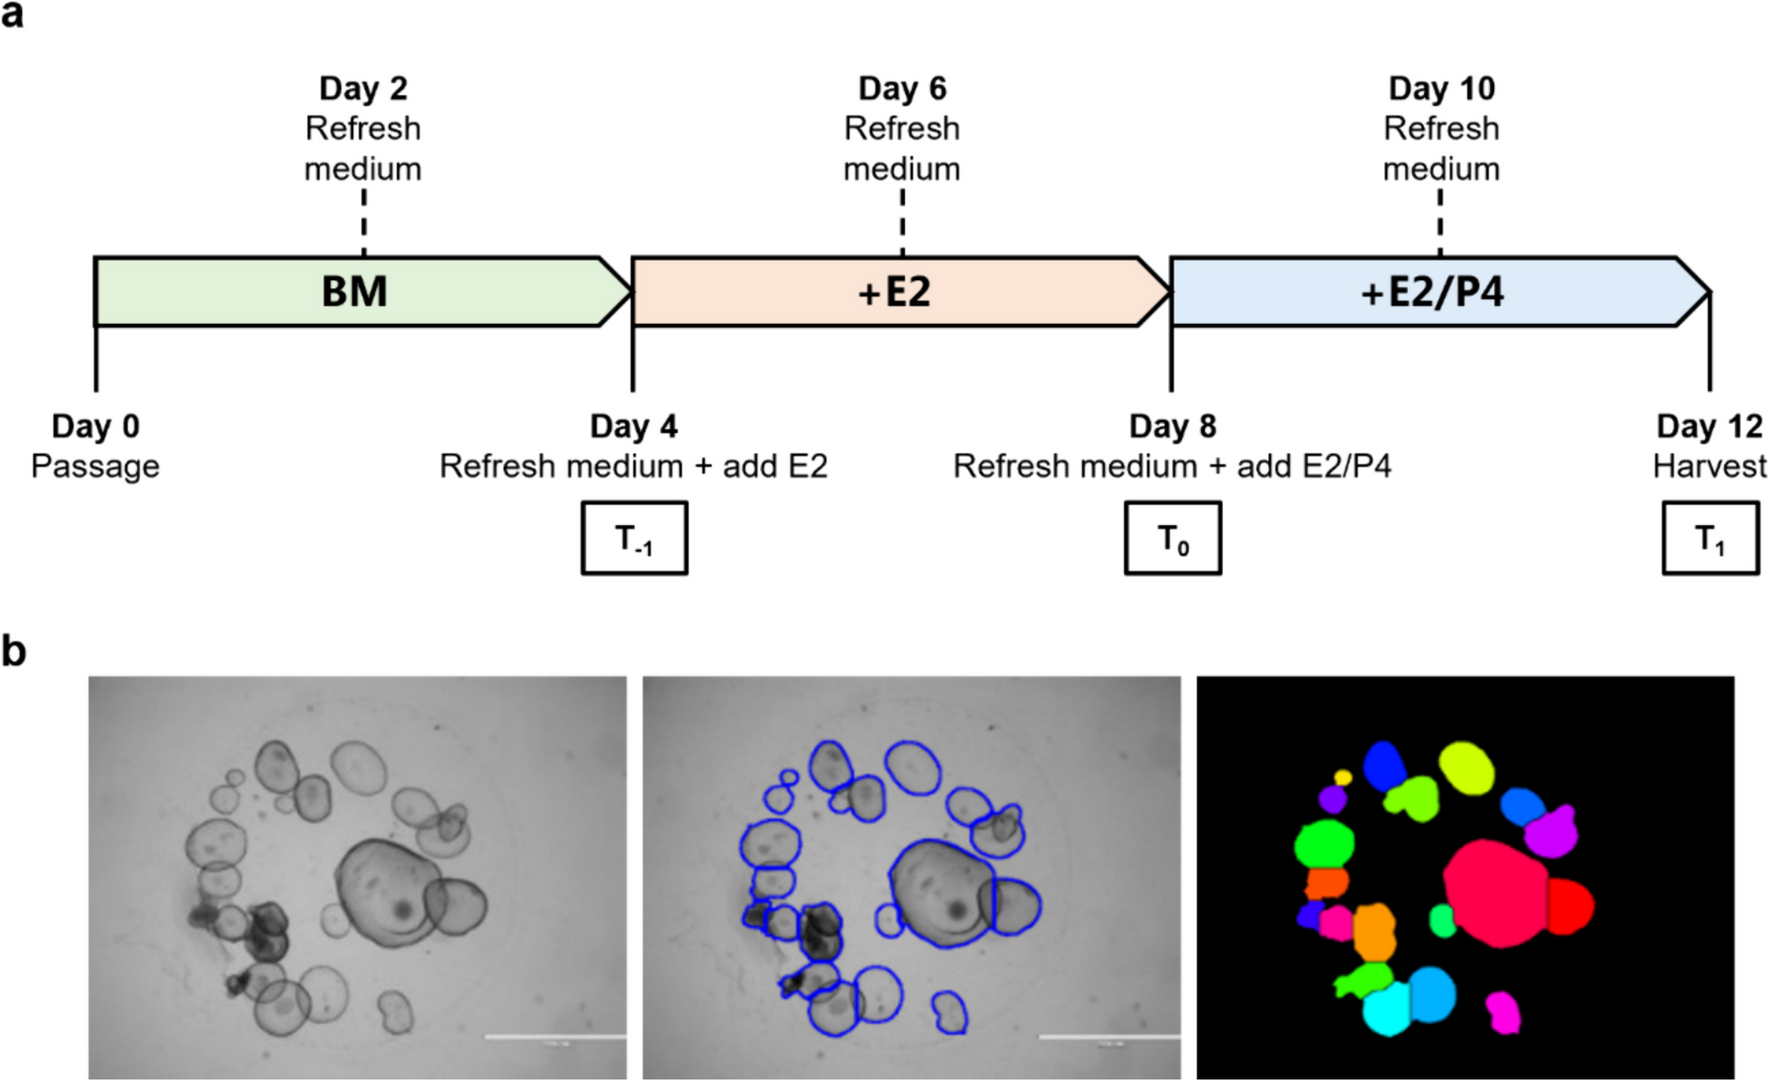 Enrichment of cell cycle pathways in progesterone-treated endometrial organoids of infertile women compared to fertile women